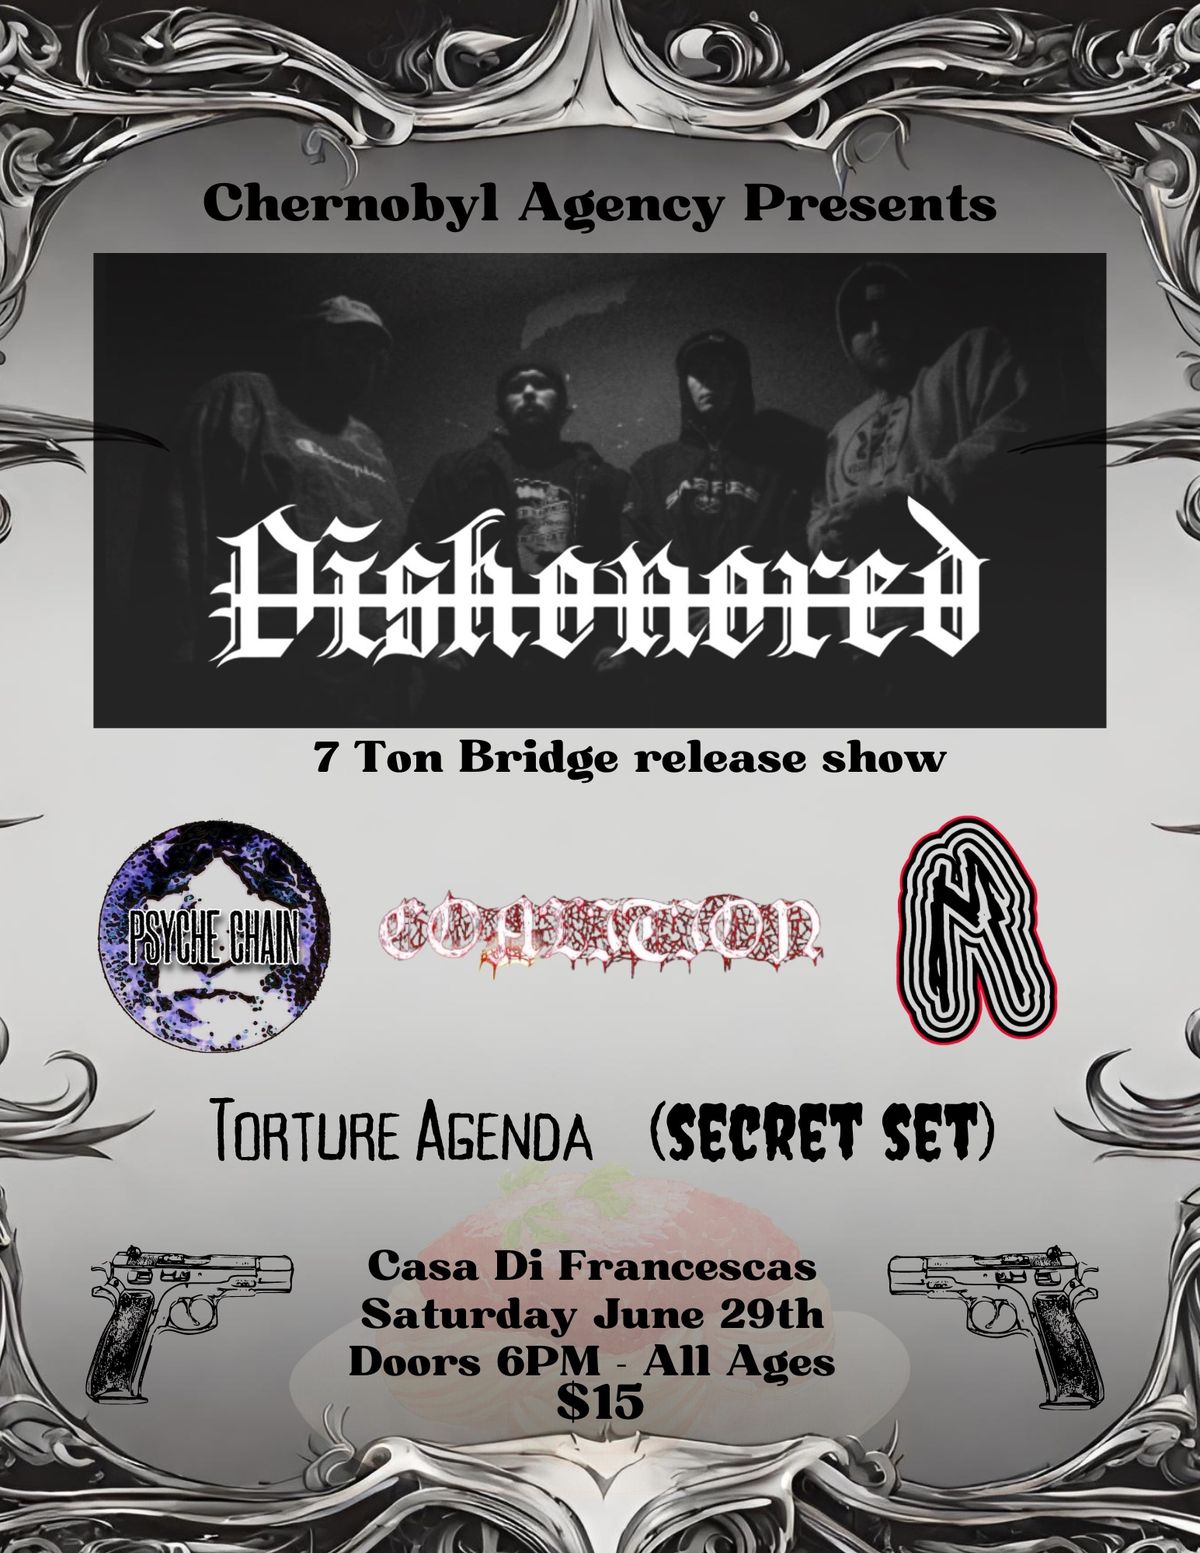 Chernobyl Agency Presents: Dishonored "7 Ton Bridge" release show w\/ special guests